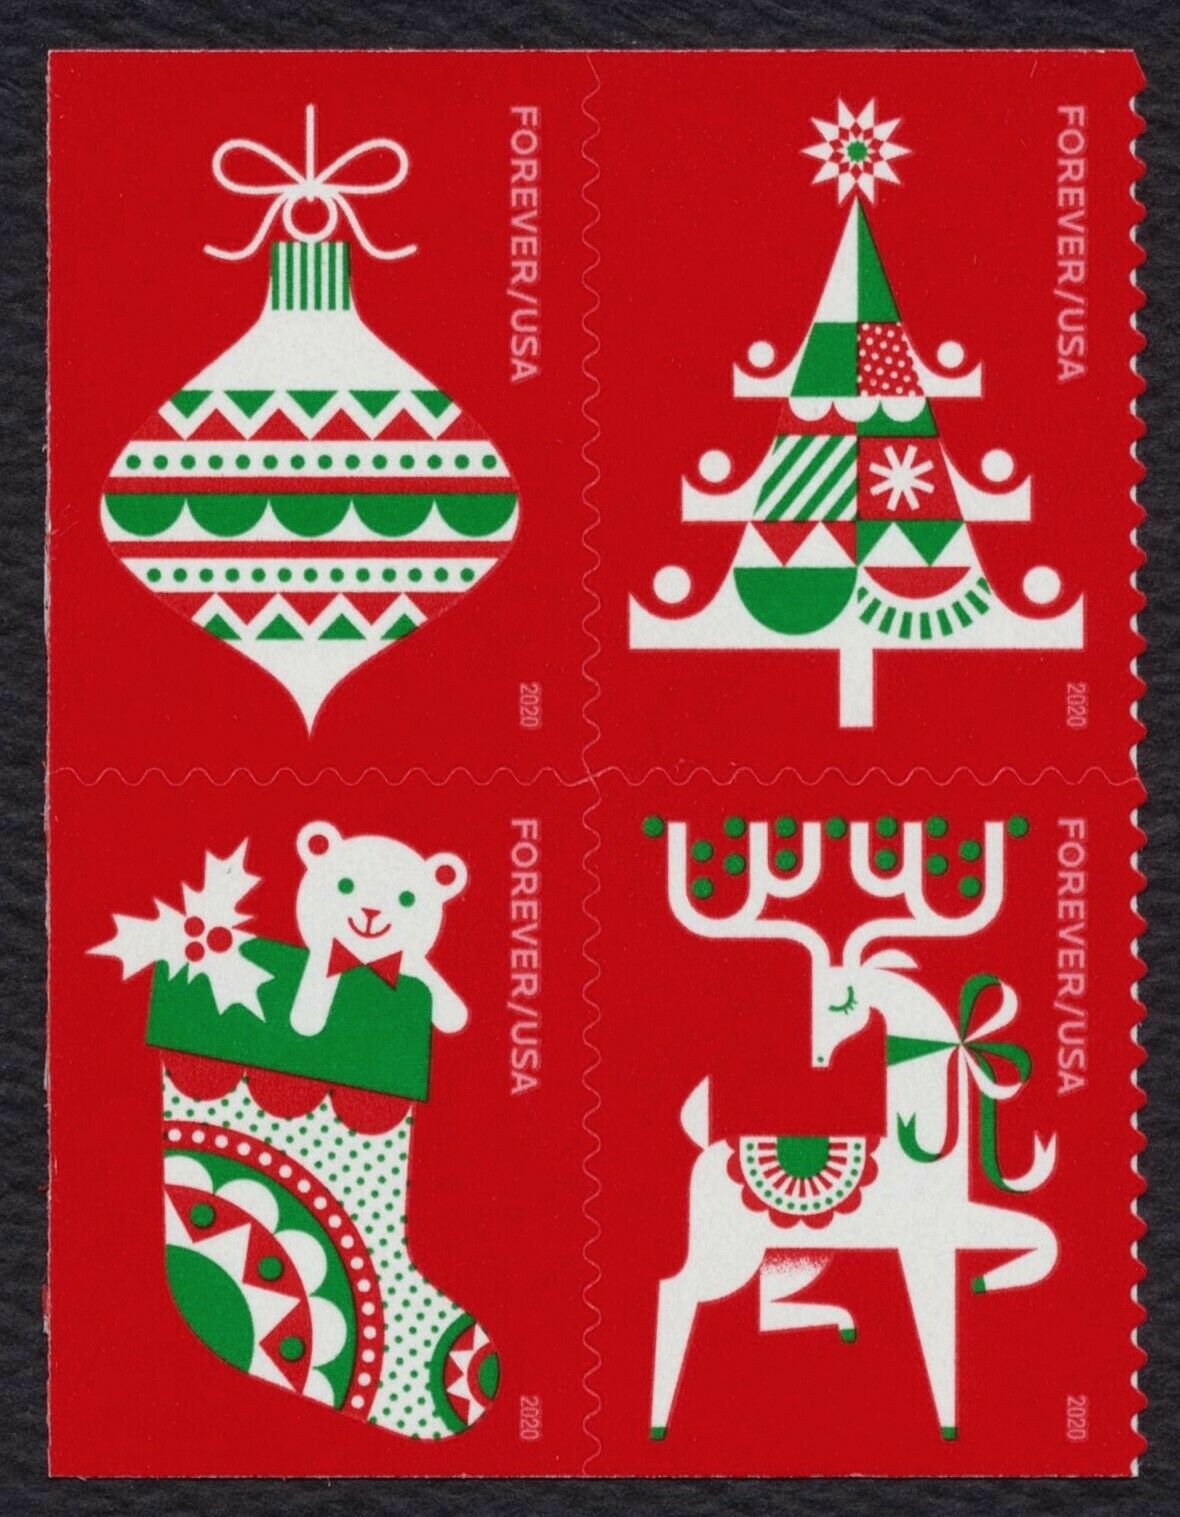 Holiday Delights Christmas Stamp 2020, 5 x Booklet of 20 Stamps, 100 pcs